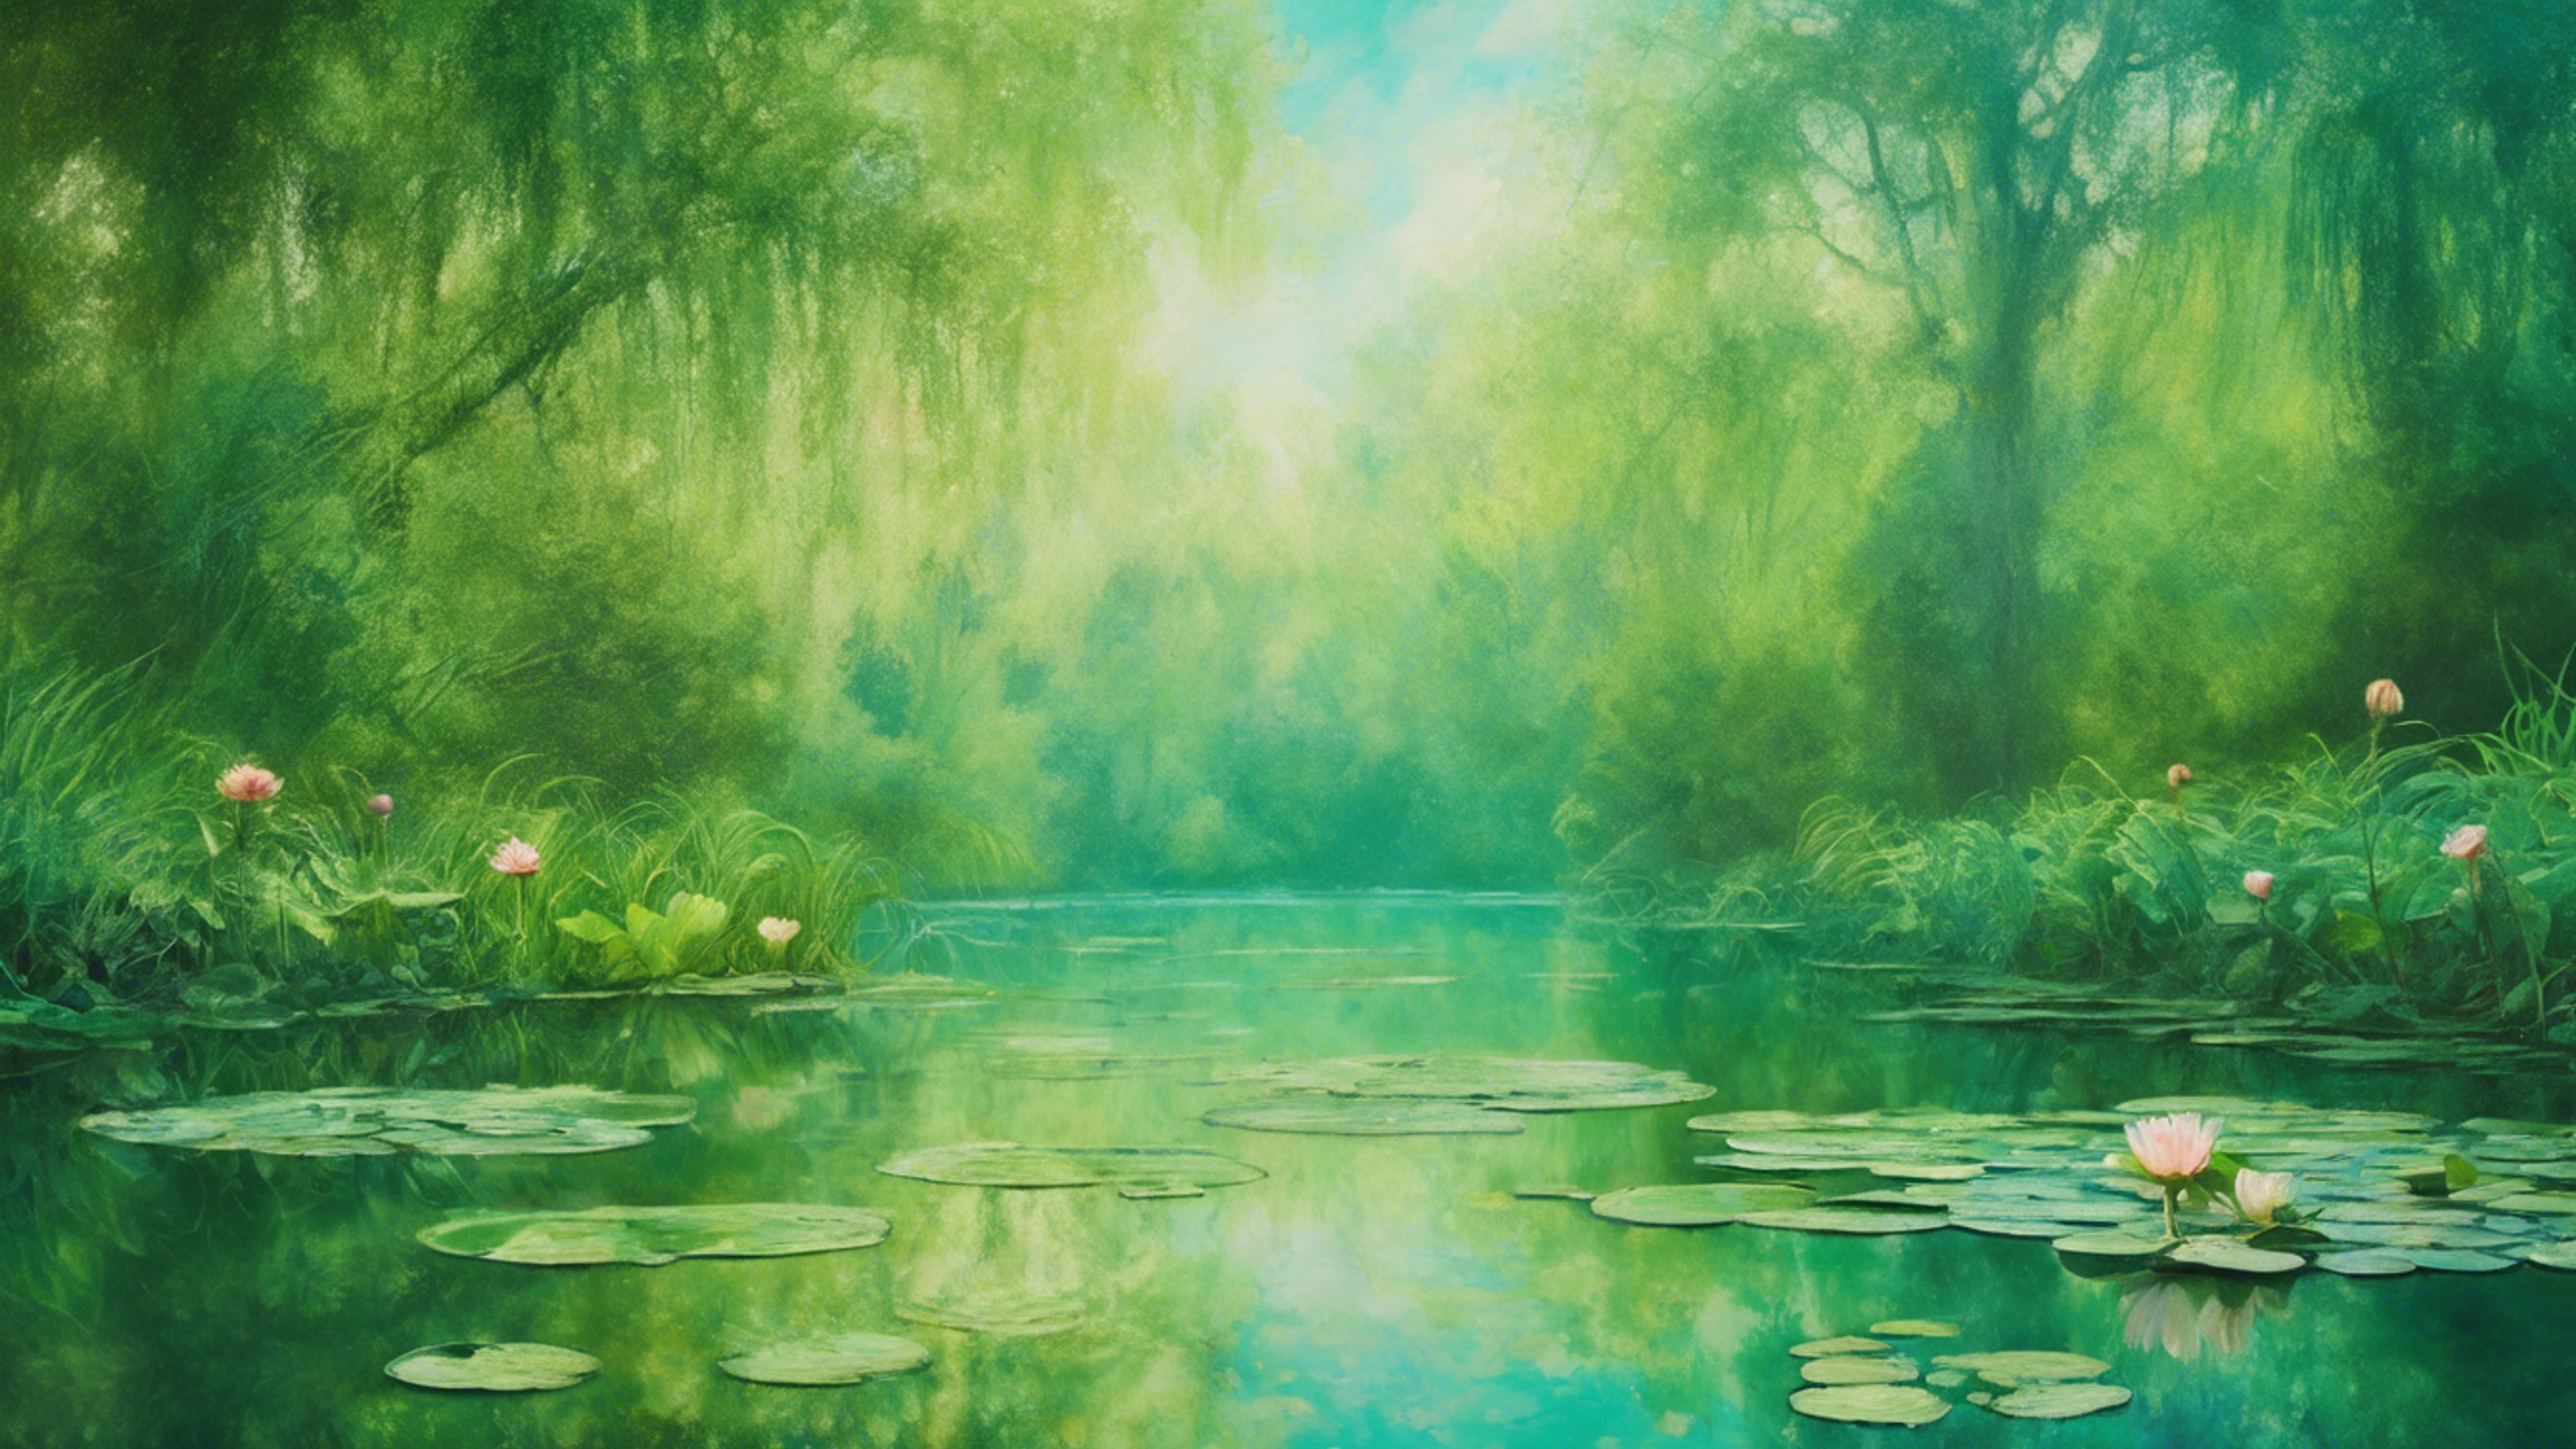 A landscape painting inspired by Monet's Water Lilies, with cool green hues. Fond d'écran[9f0abb477fe746e08ba1]